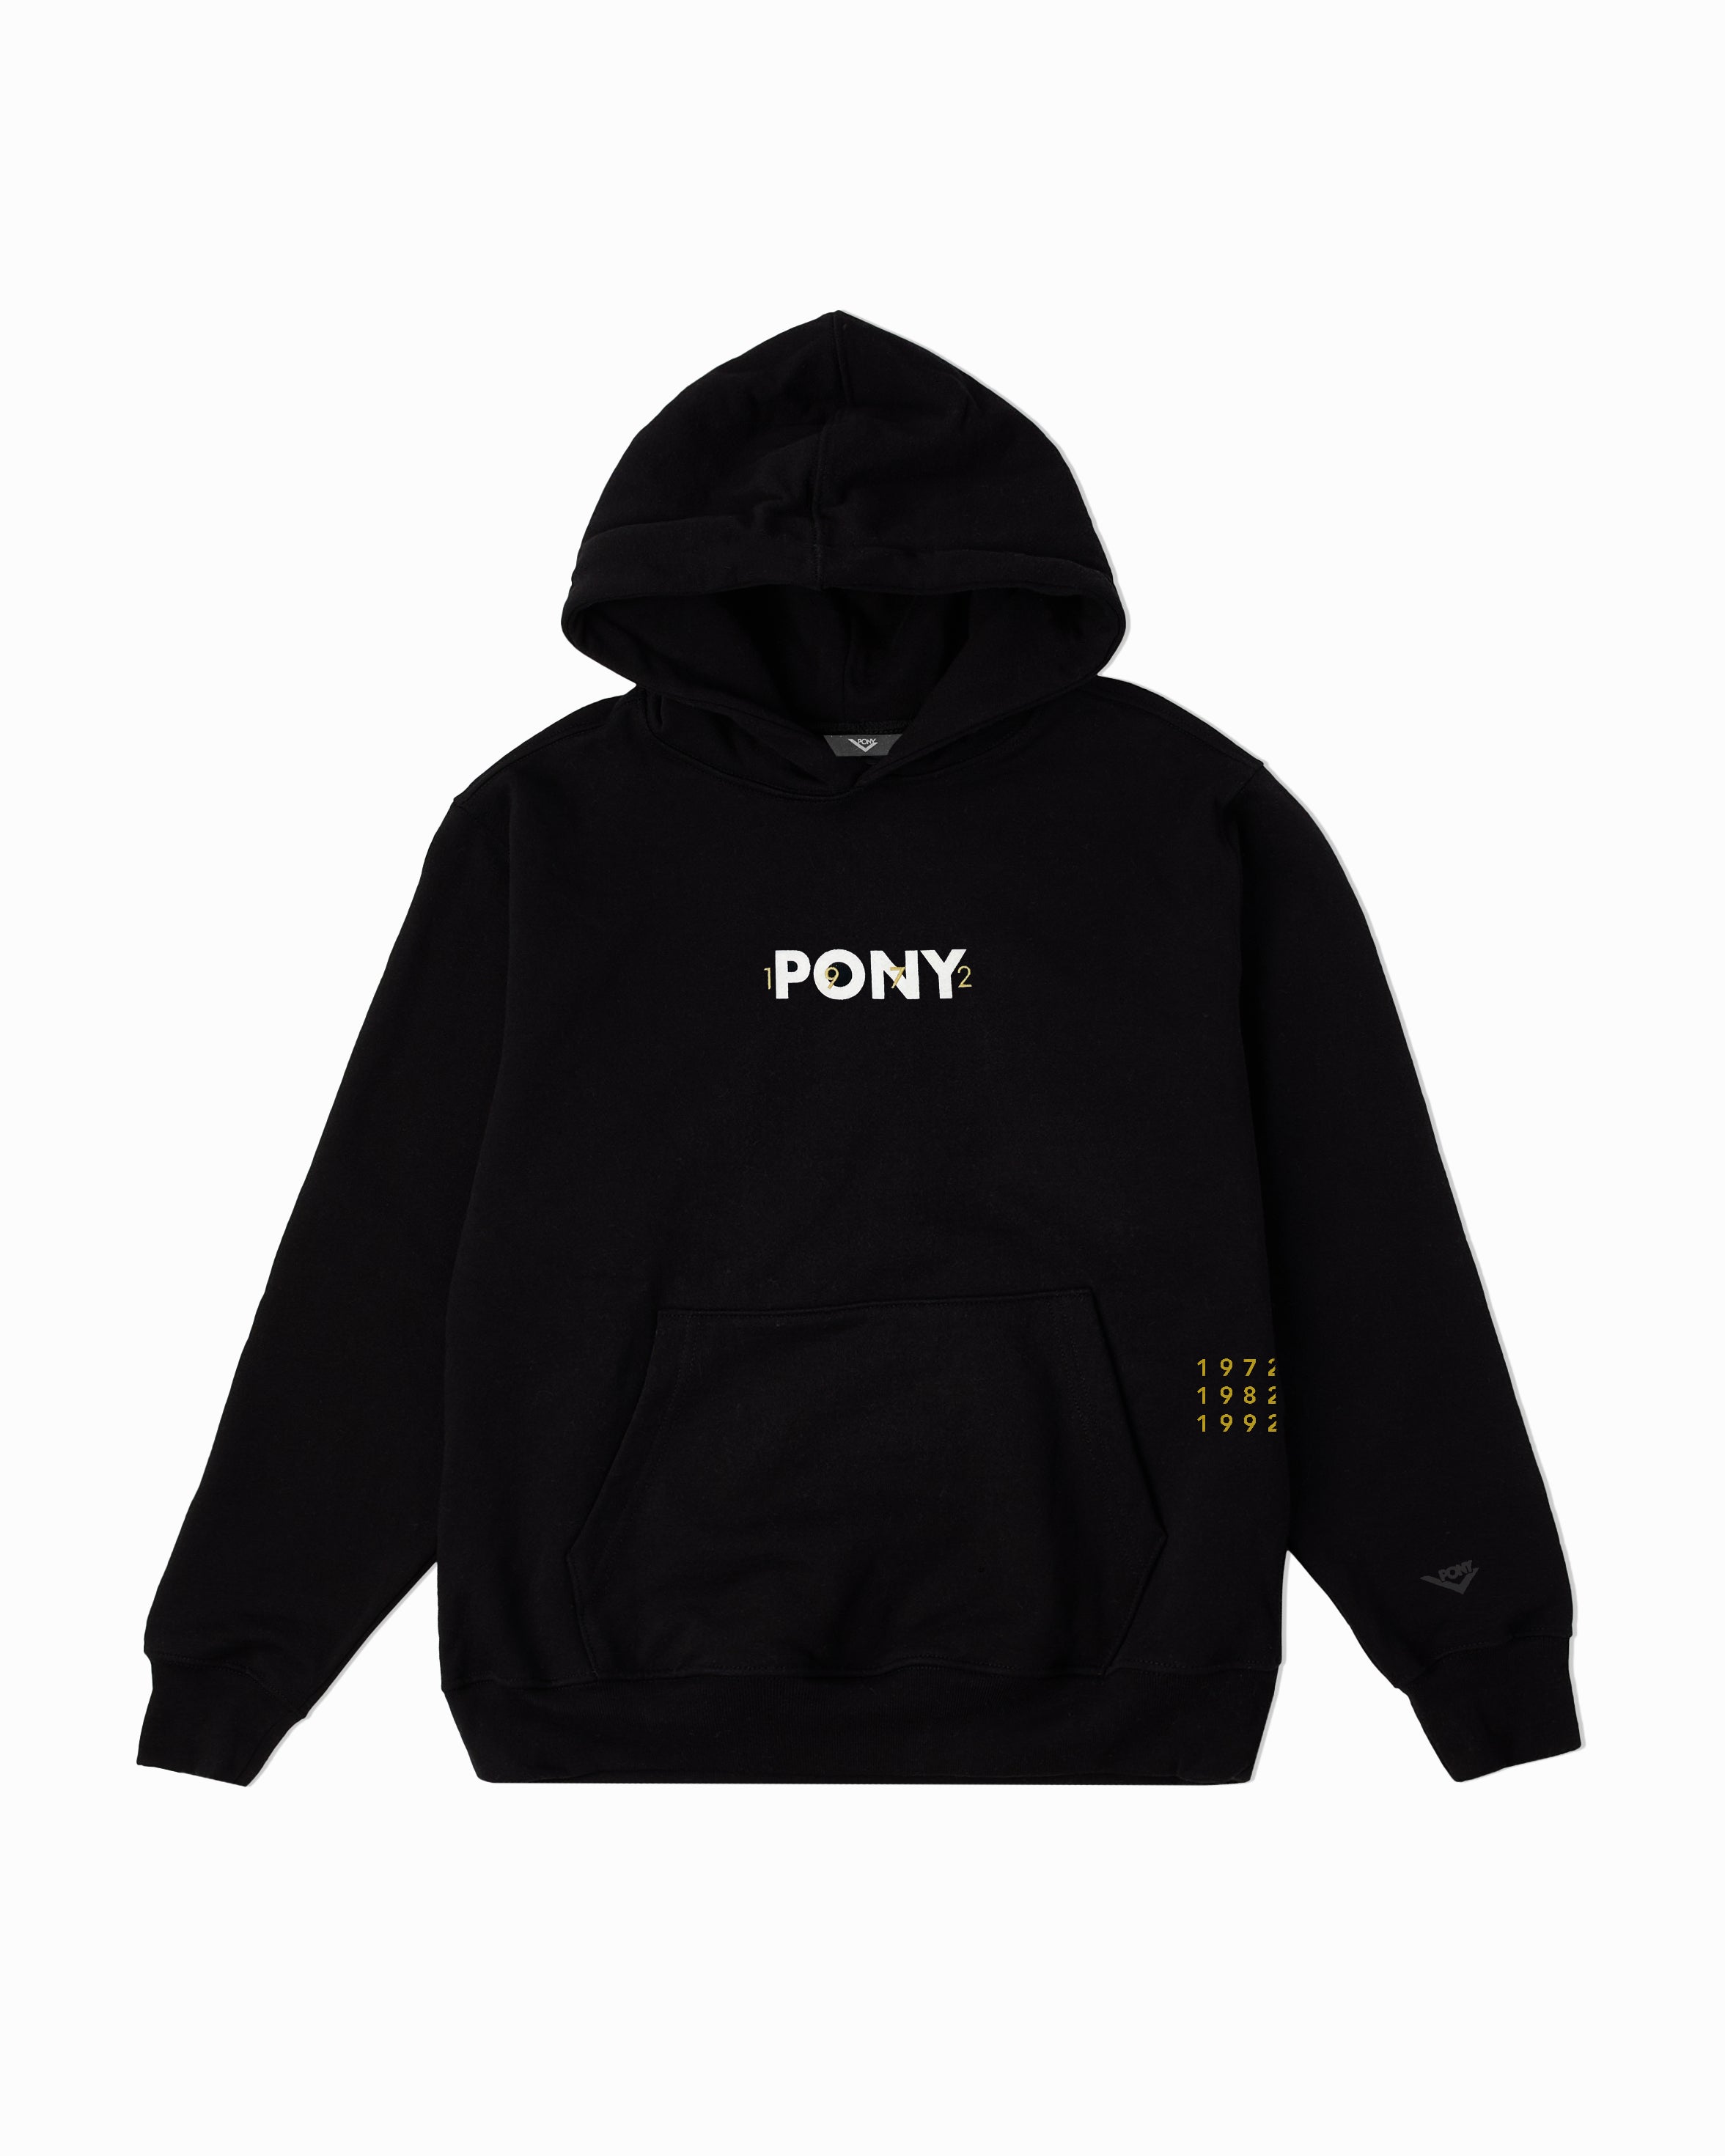 Black PONY Semicentennial sports hoodie with PONY in white with 1972 in gold in the middle of the chest. PONY years "1972, 1982, 1992, 2002, 2012, and 2022" embroidered on the right side of the kangaroo pocket. PONY Lock-up in black in the middle of sleeve above cuff.